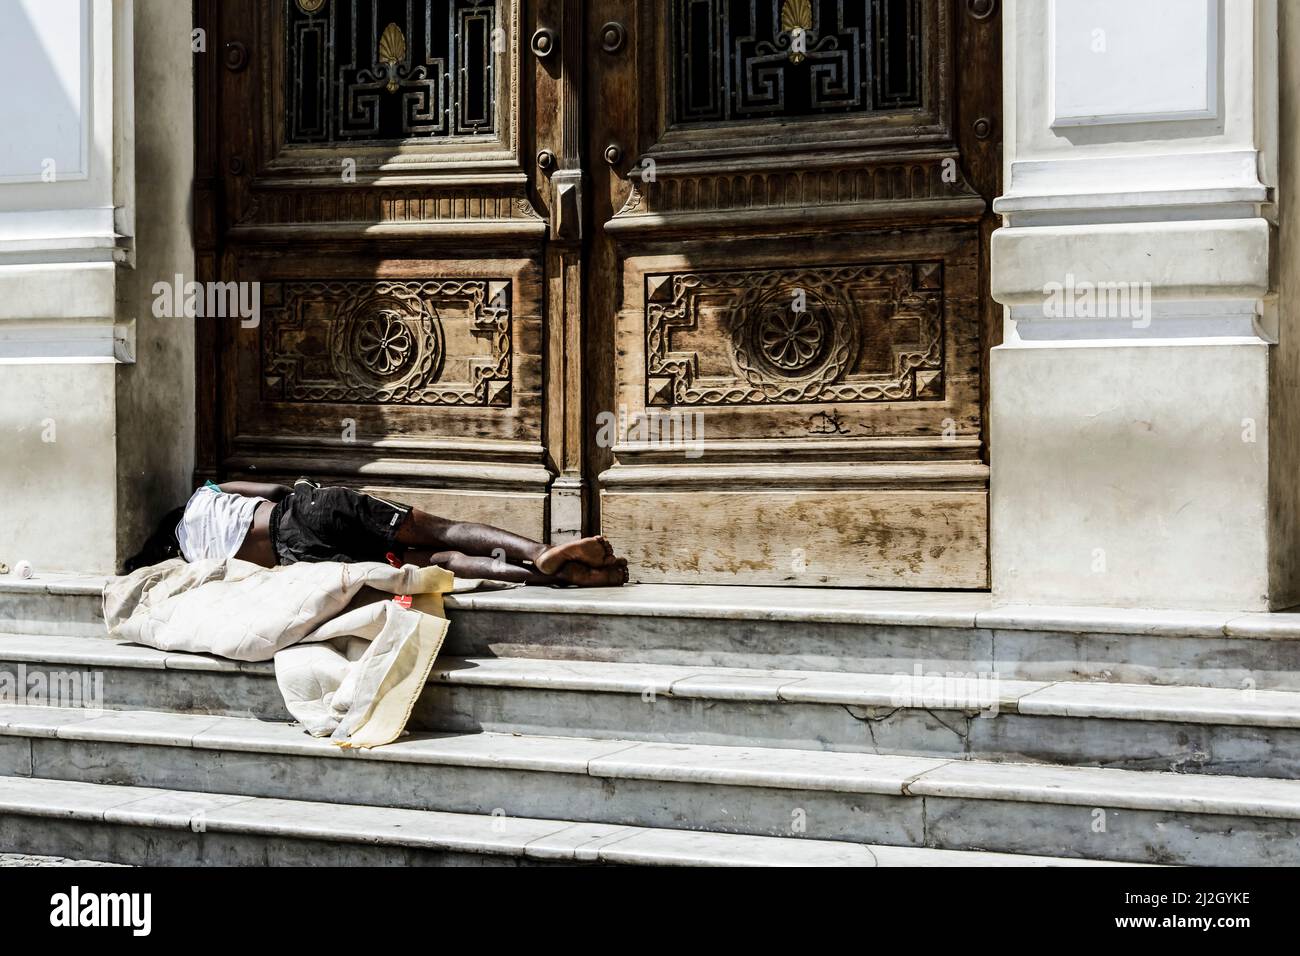 Homeless man sleeping at the door of a historic building in the city of Salvador, capital of Bahia, Brazil Stock Photo